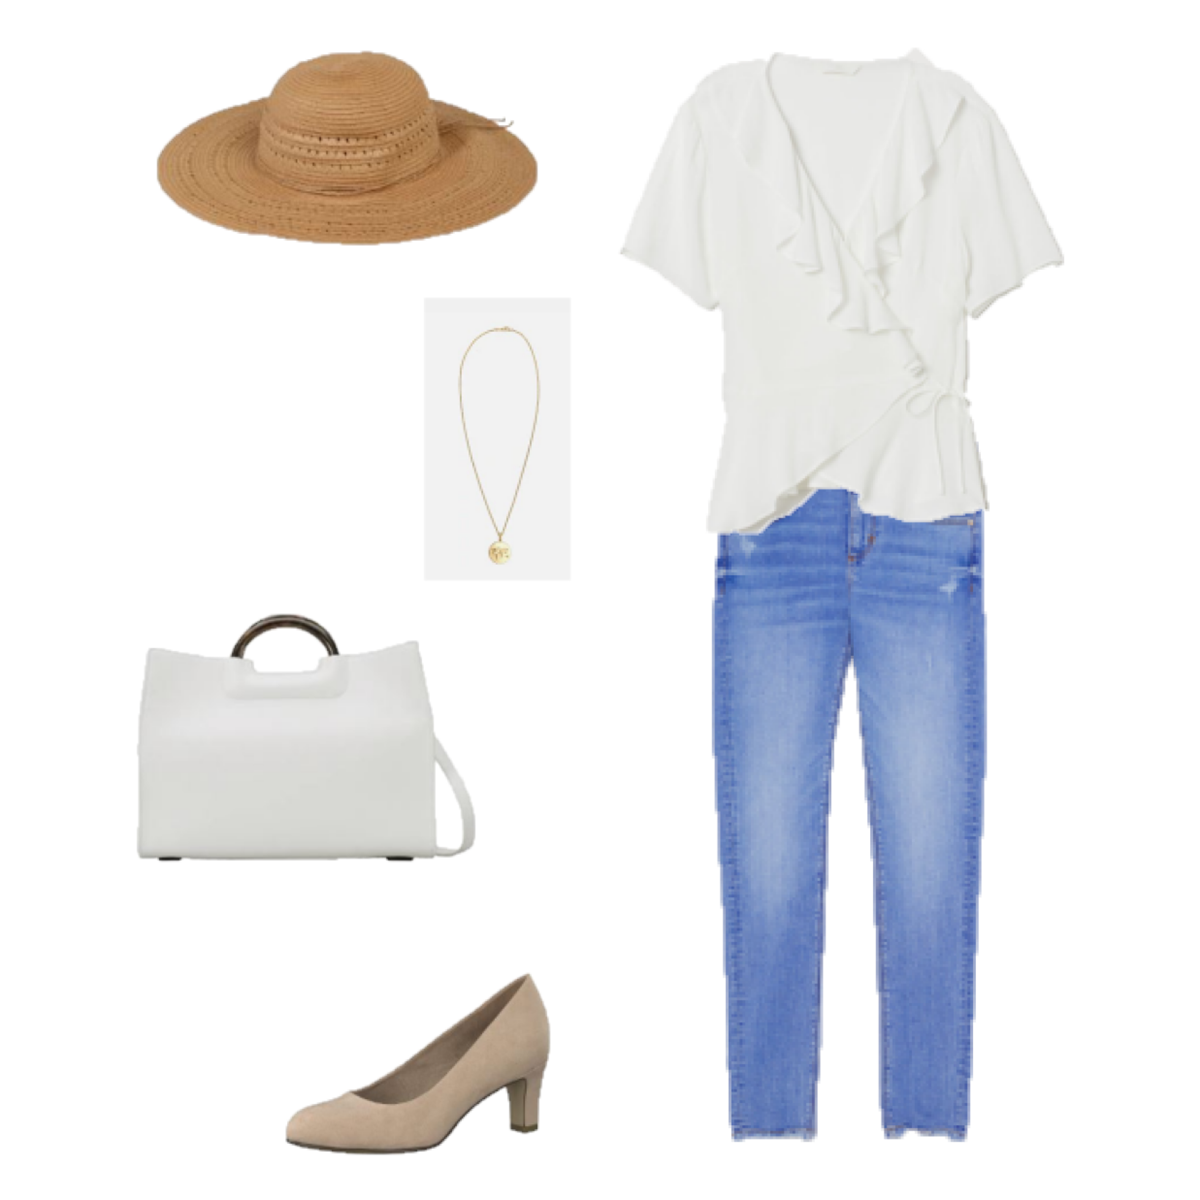 Outfit of the Day: A white wrap blouse